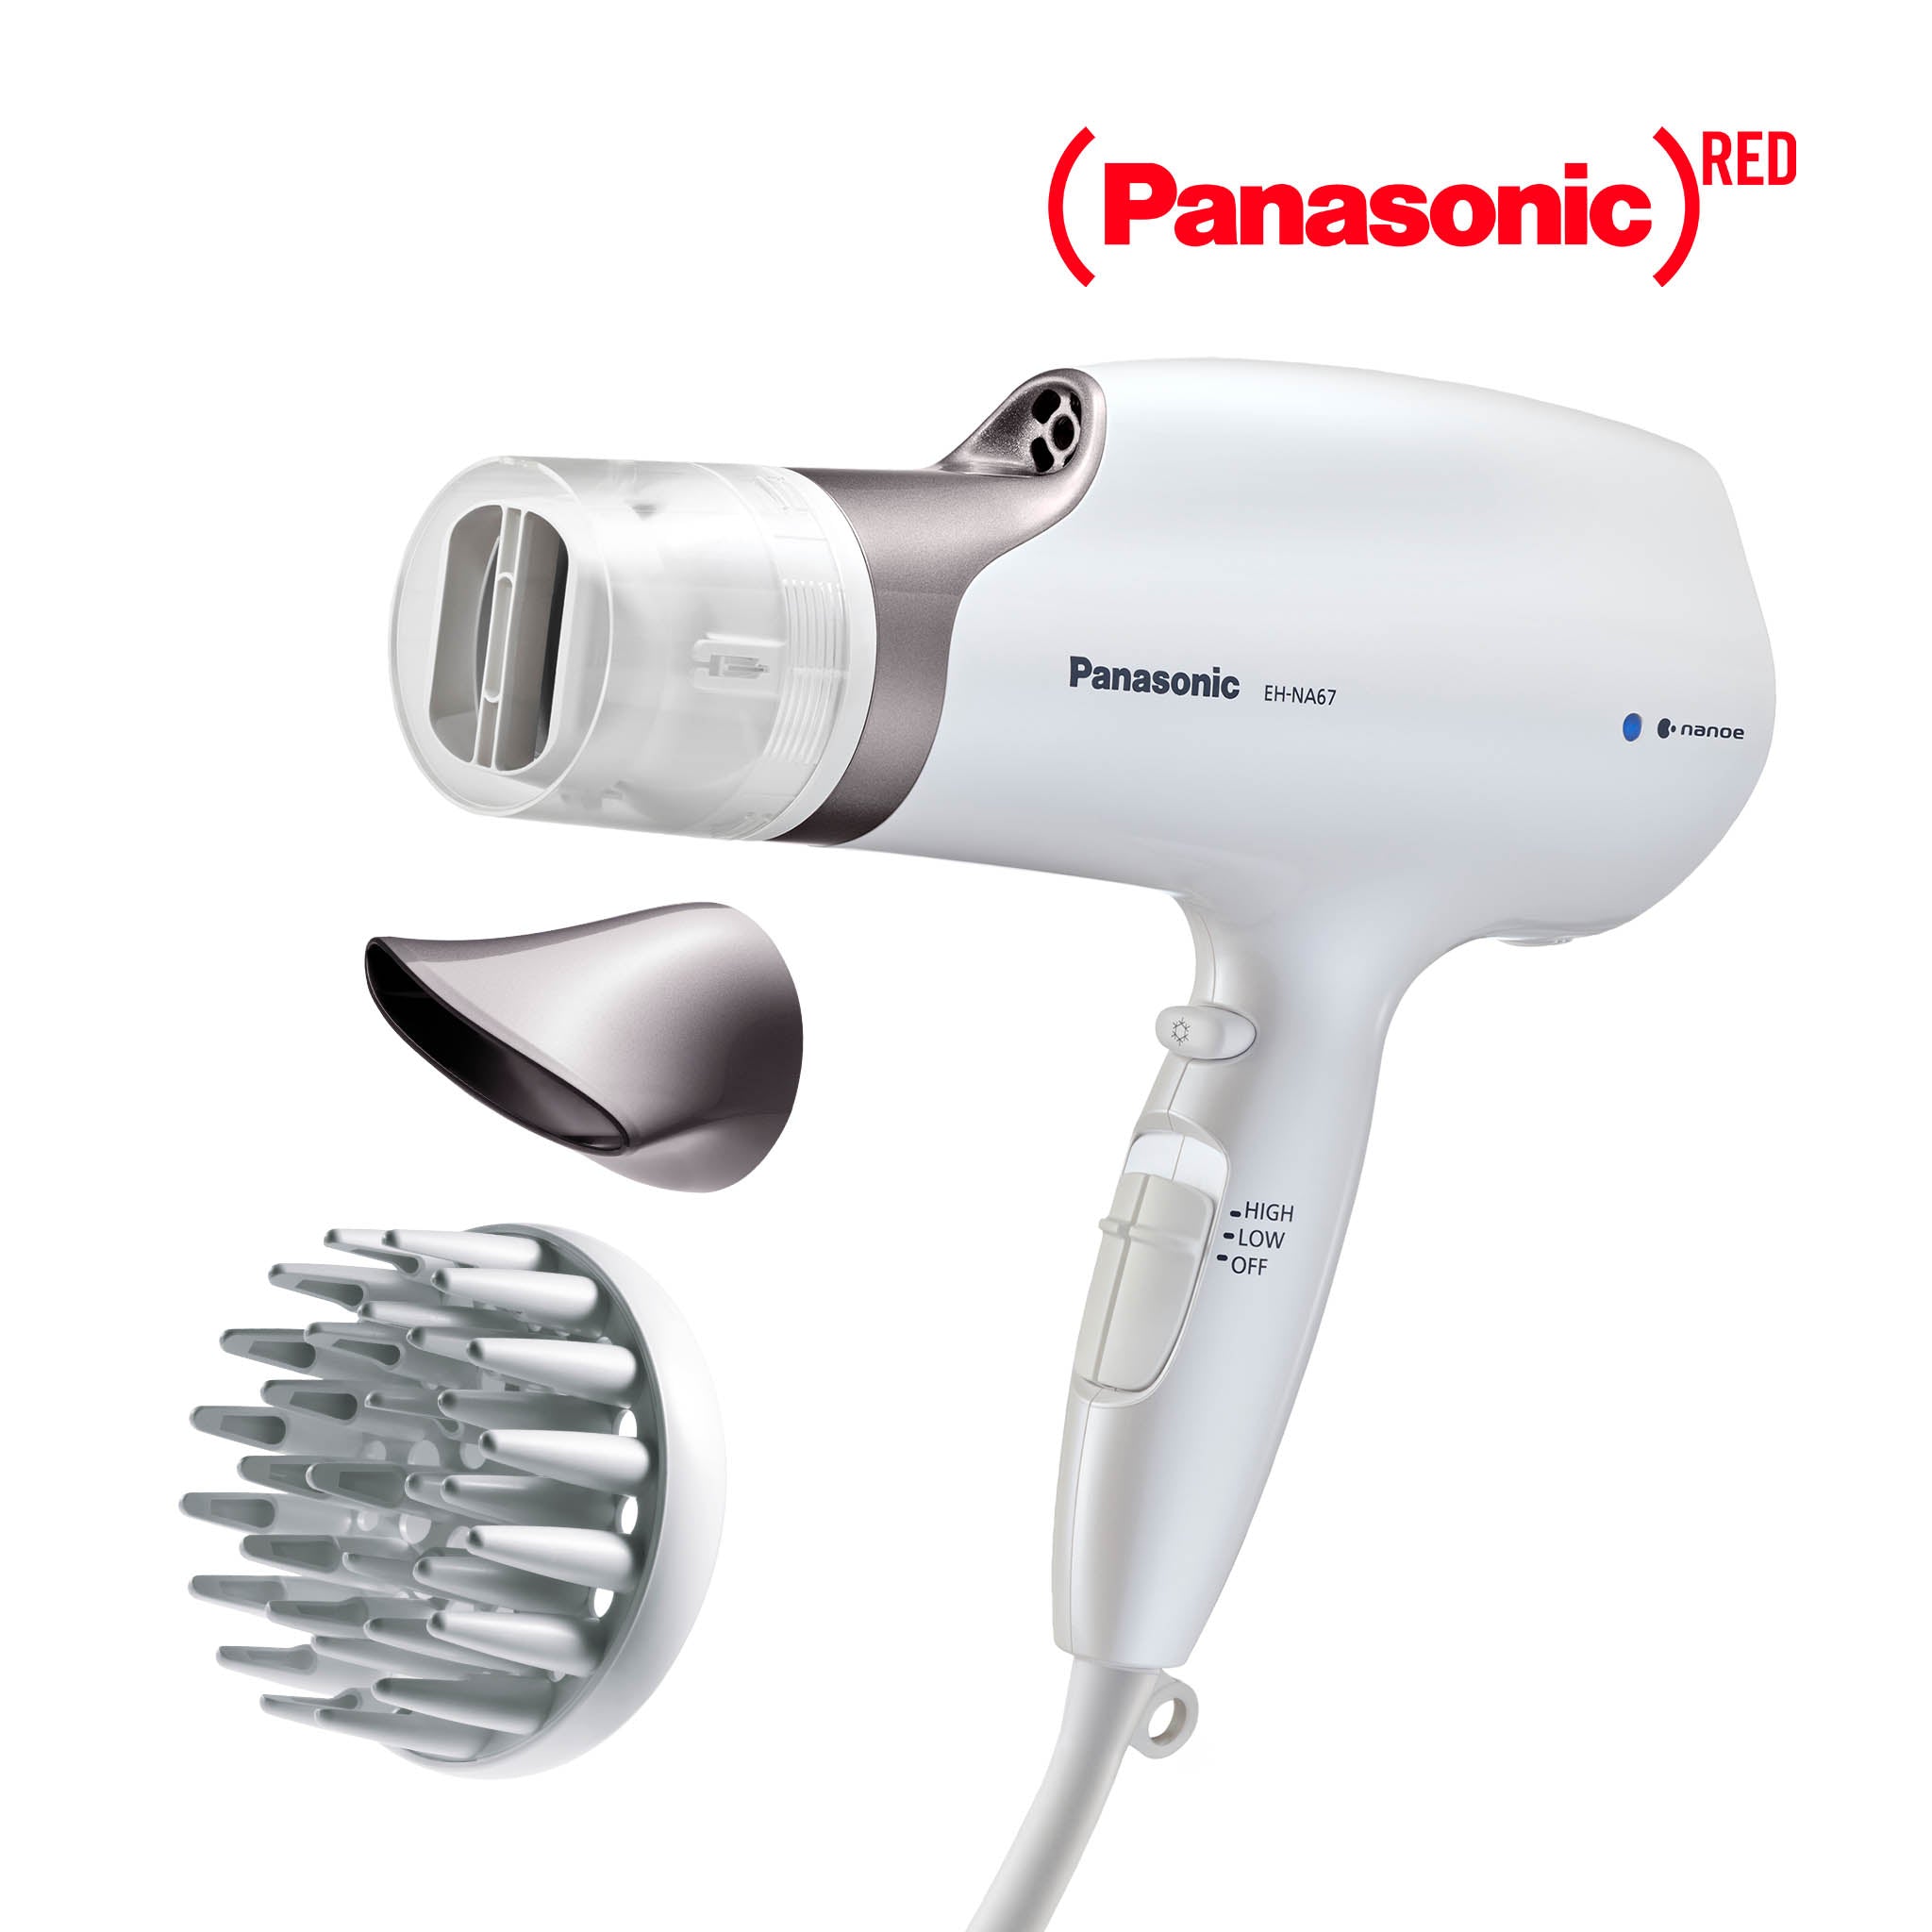 Panasonic nanoe™ Hair Dryer with 3 Styling Attachments including  Oscillating Quick-Dry Nozzle